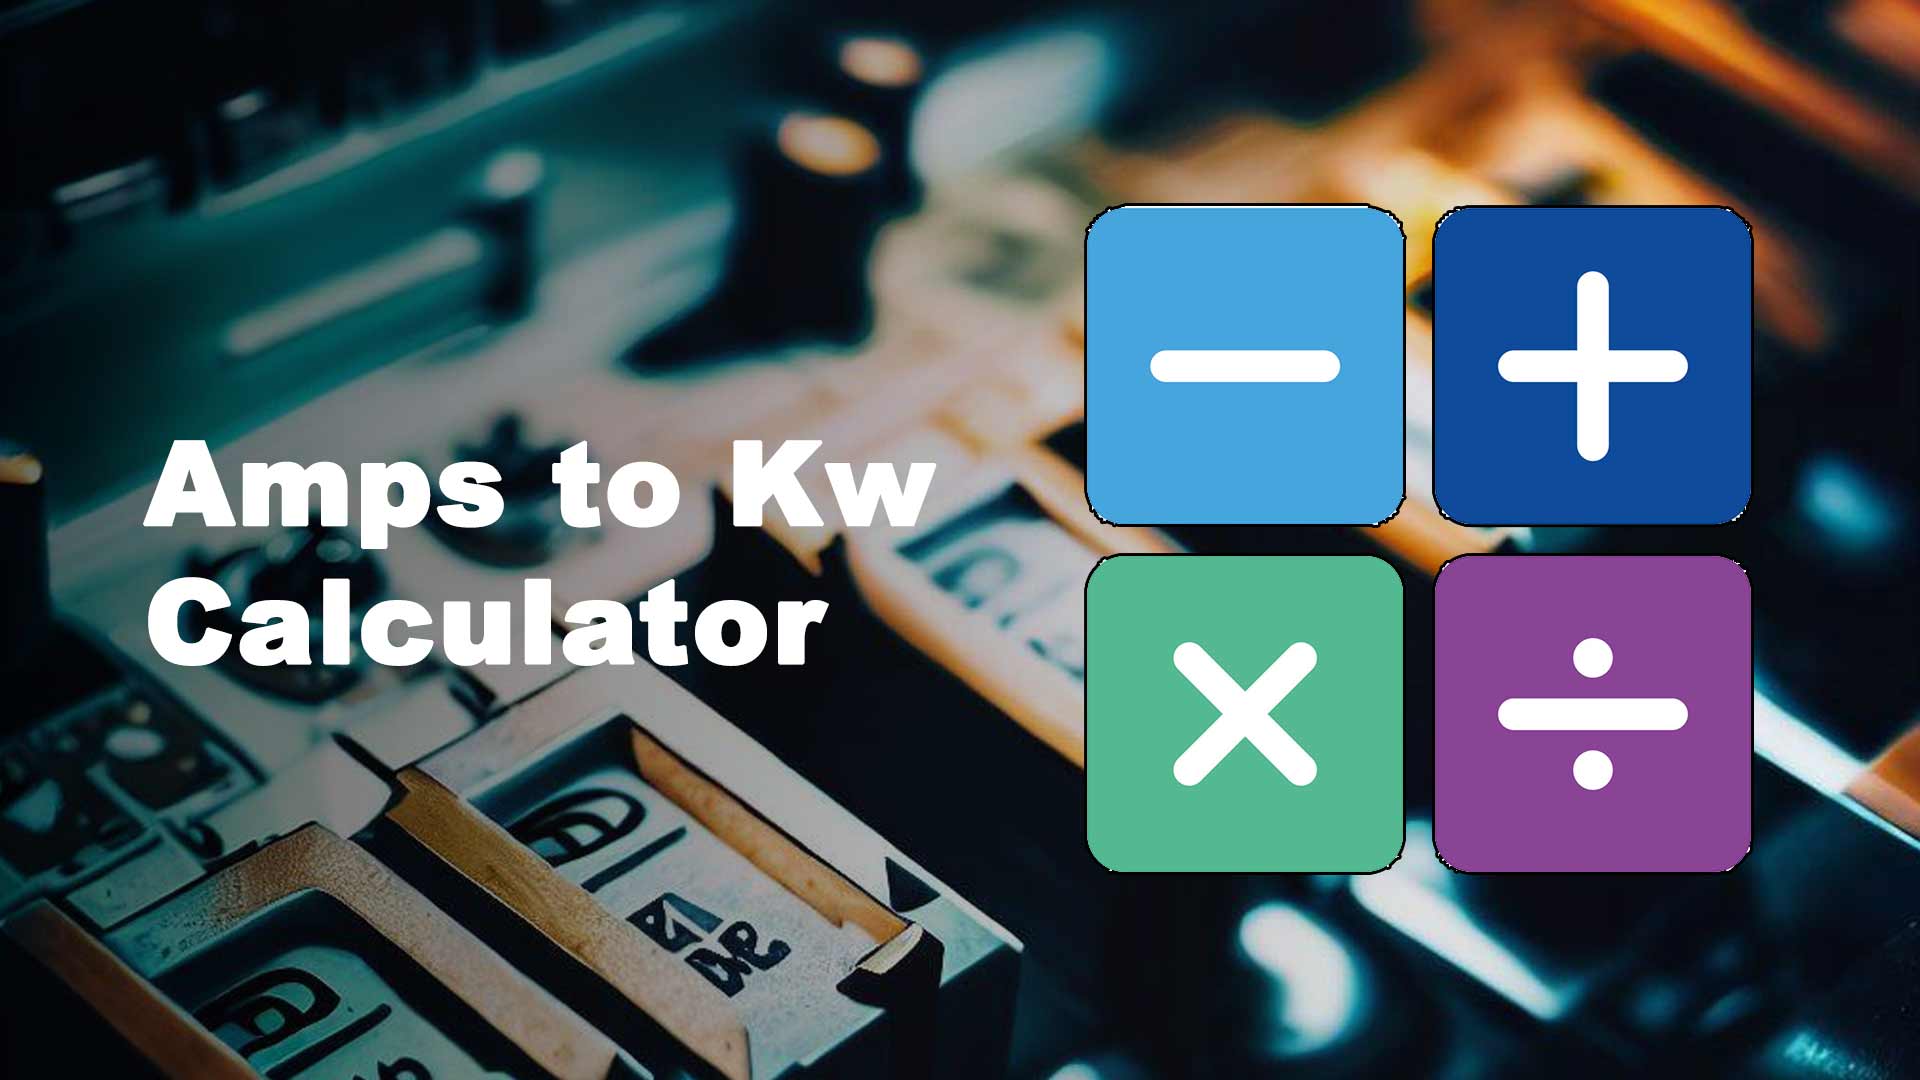 Amps to Kw Calculator